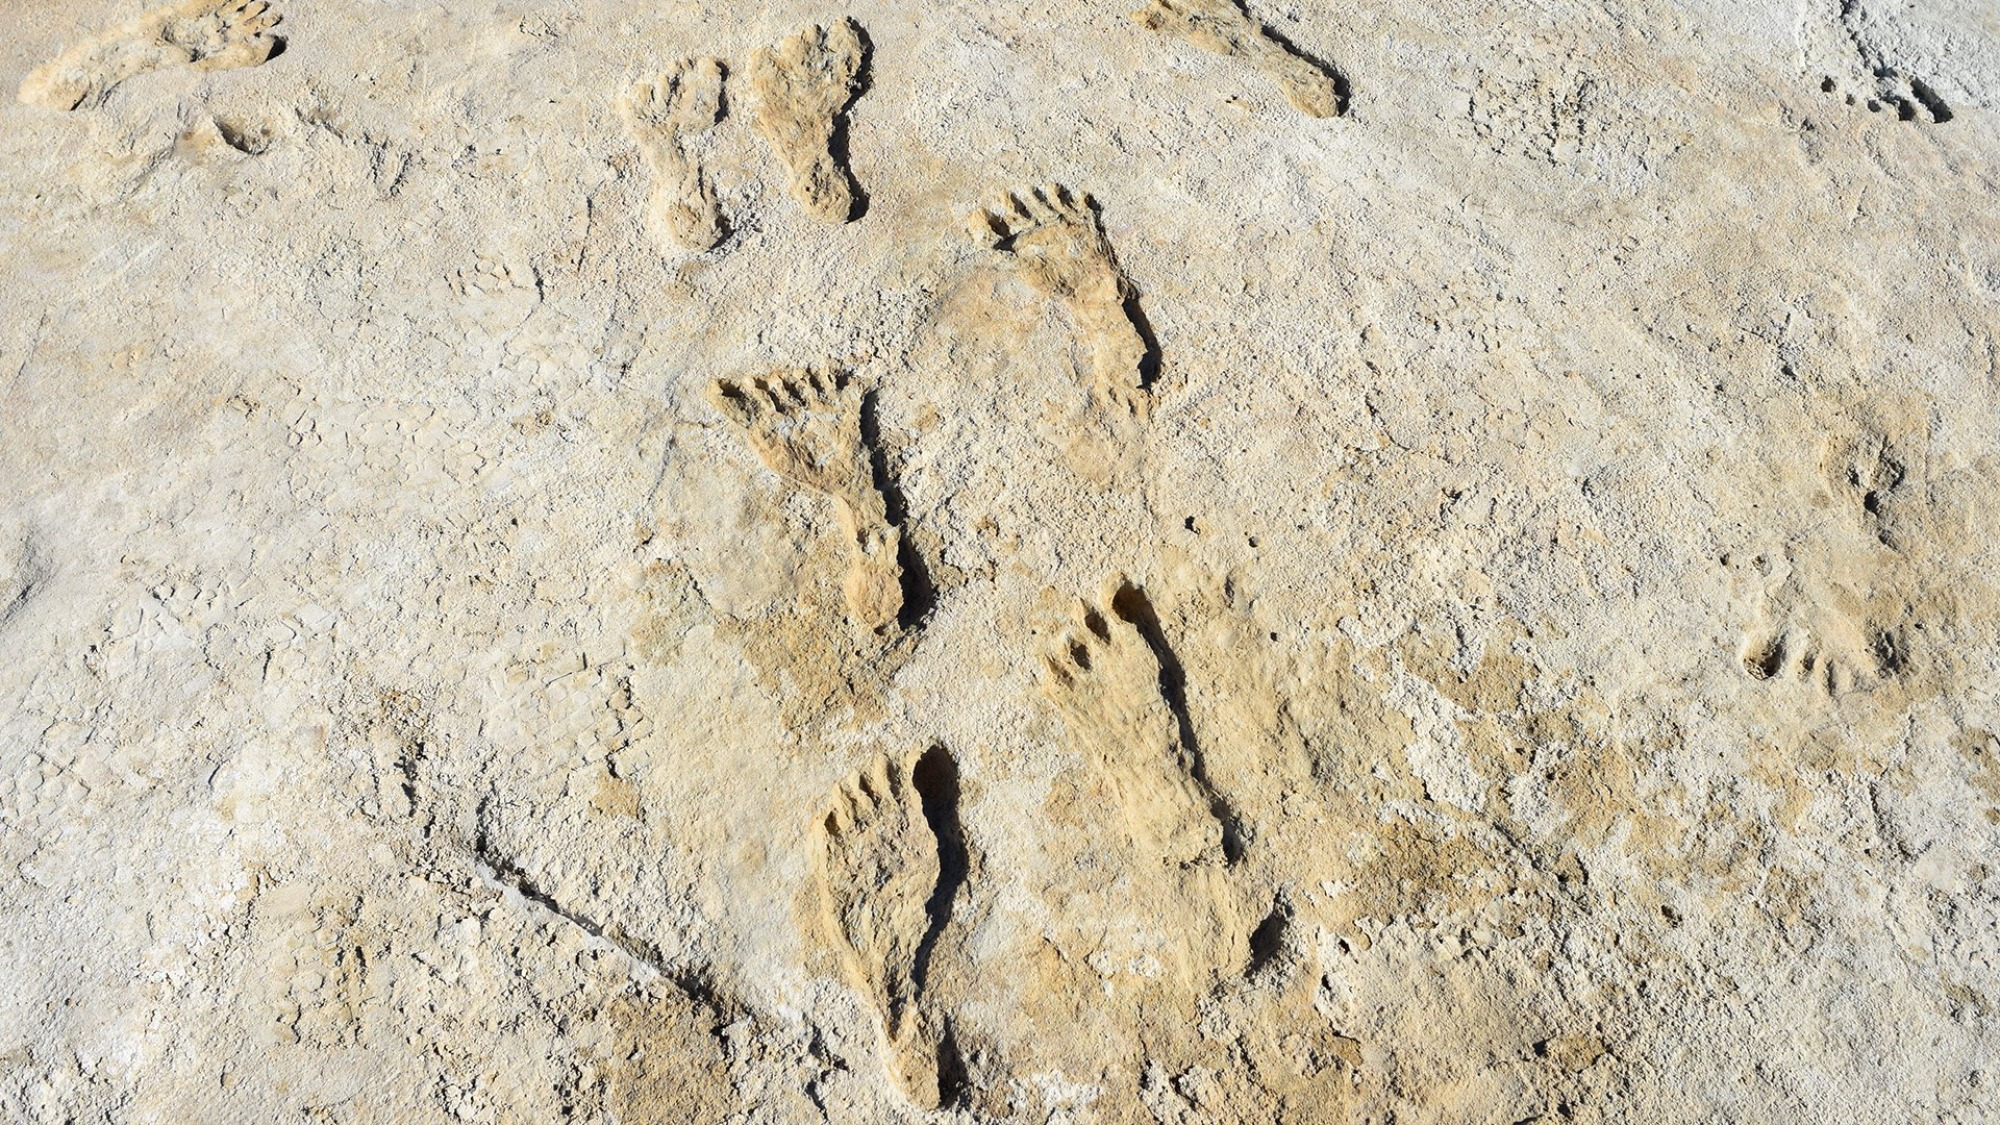 Human fossil footprints at White Sands National Park in New Mexico.